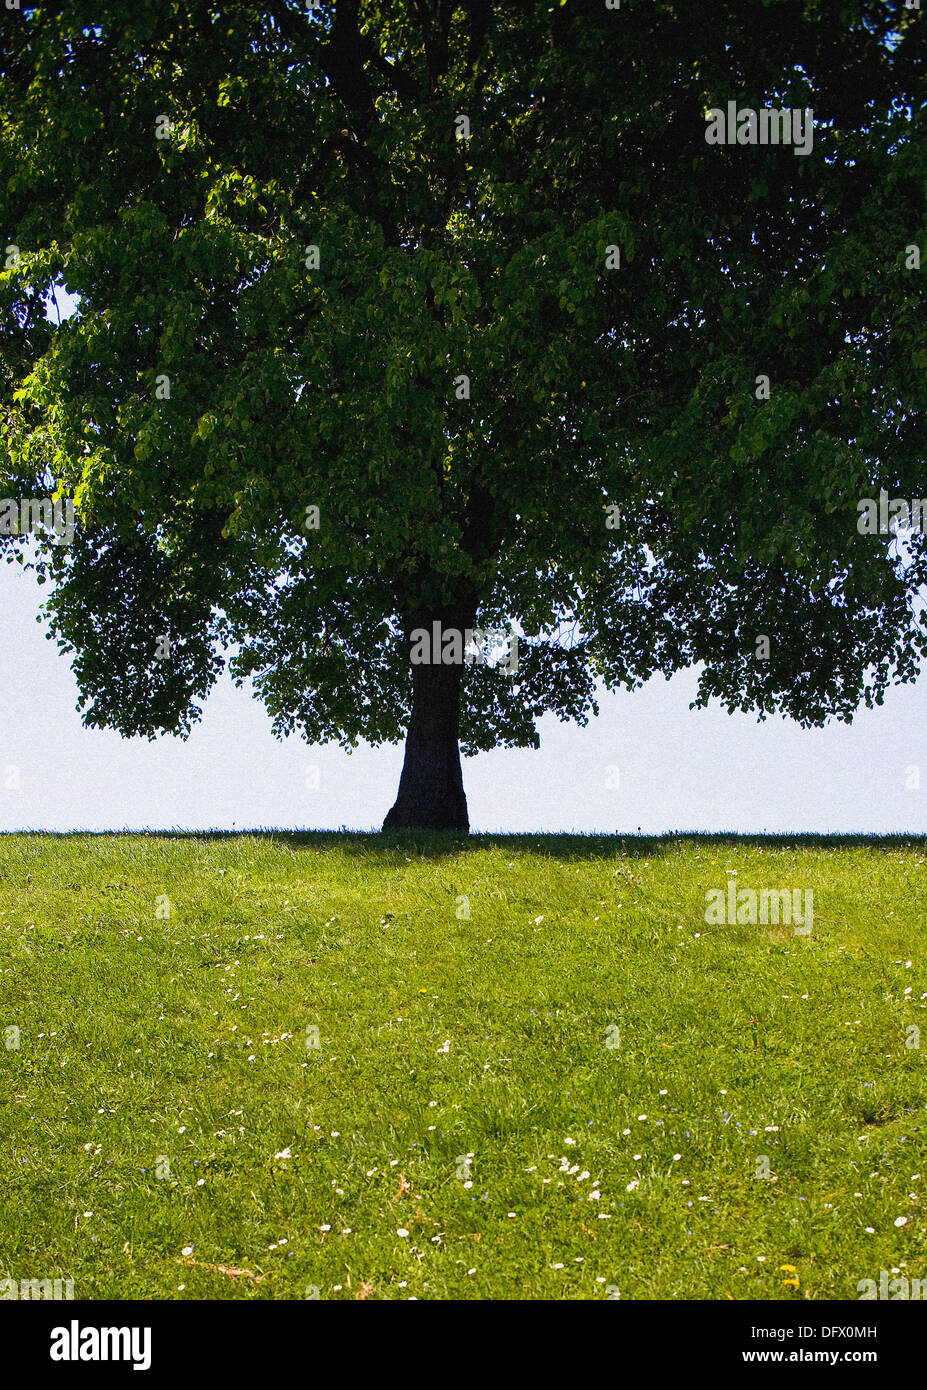 Large Leafy Tree and Green Grass in Summer Stock Photo